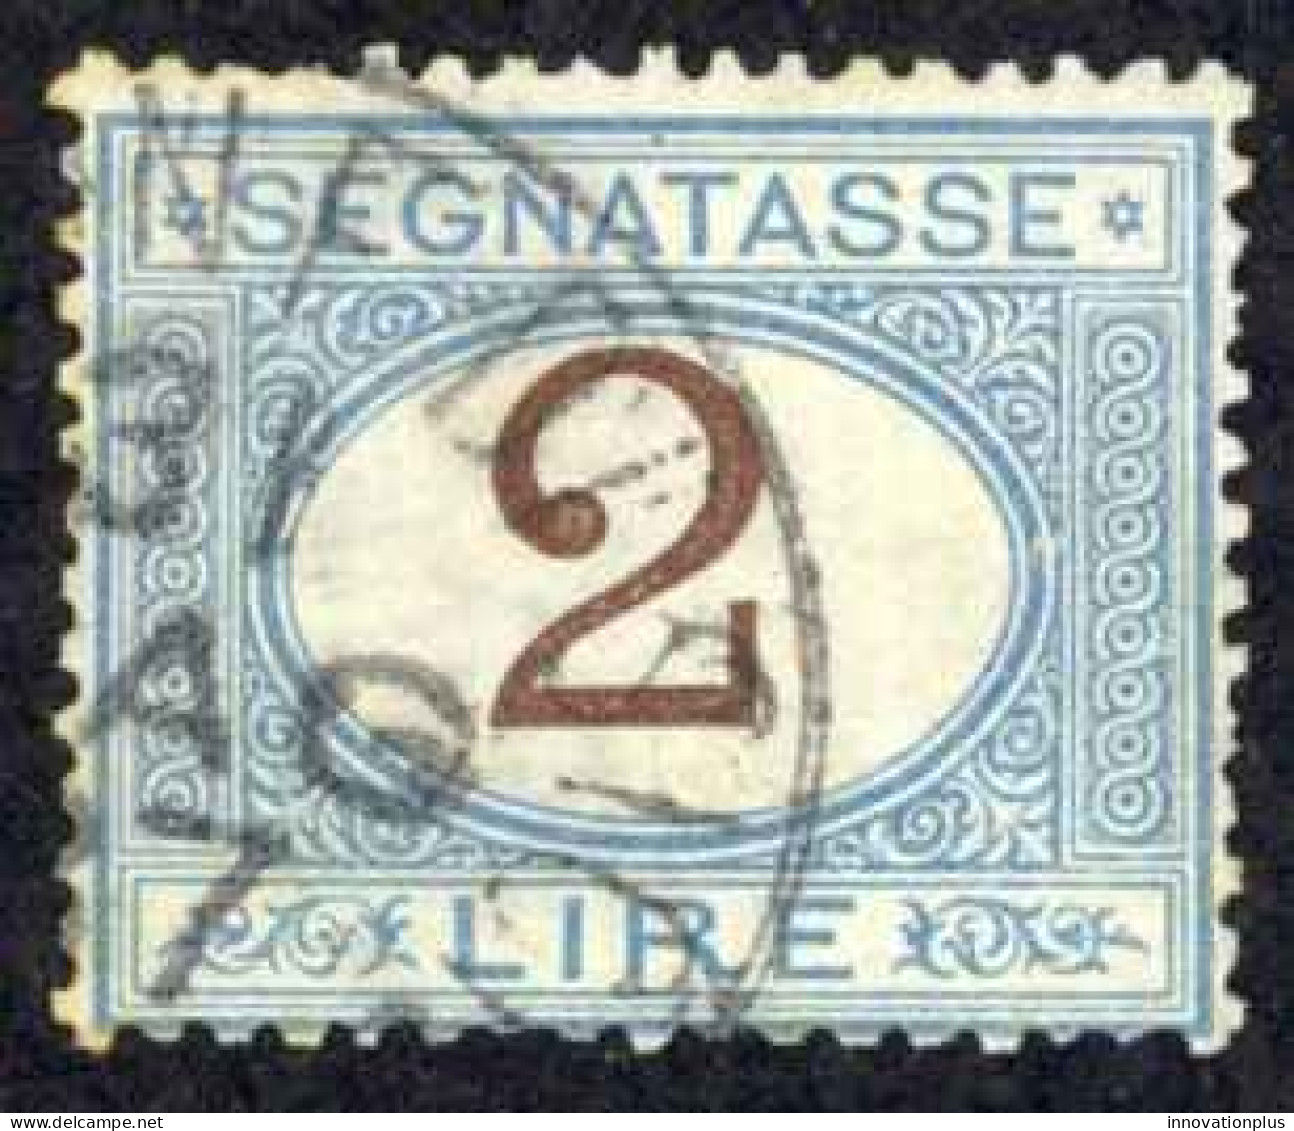 Italy Sc# J15 Used (a) 1870-1925 2l Light Blue & Brown Postage Due - Postage Due